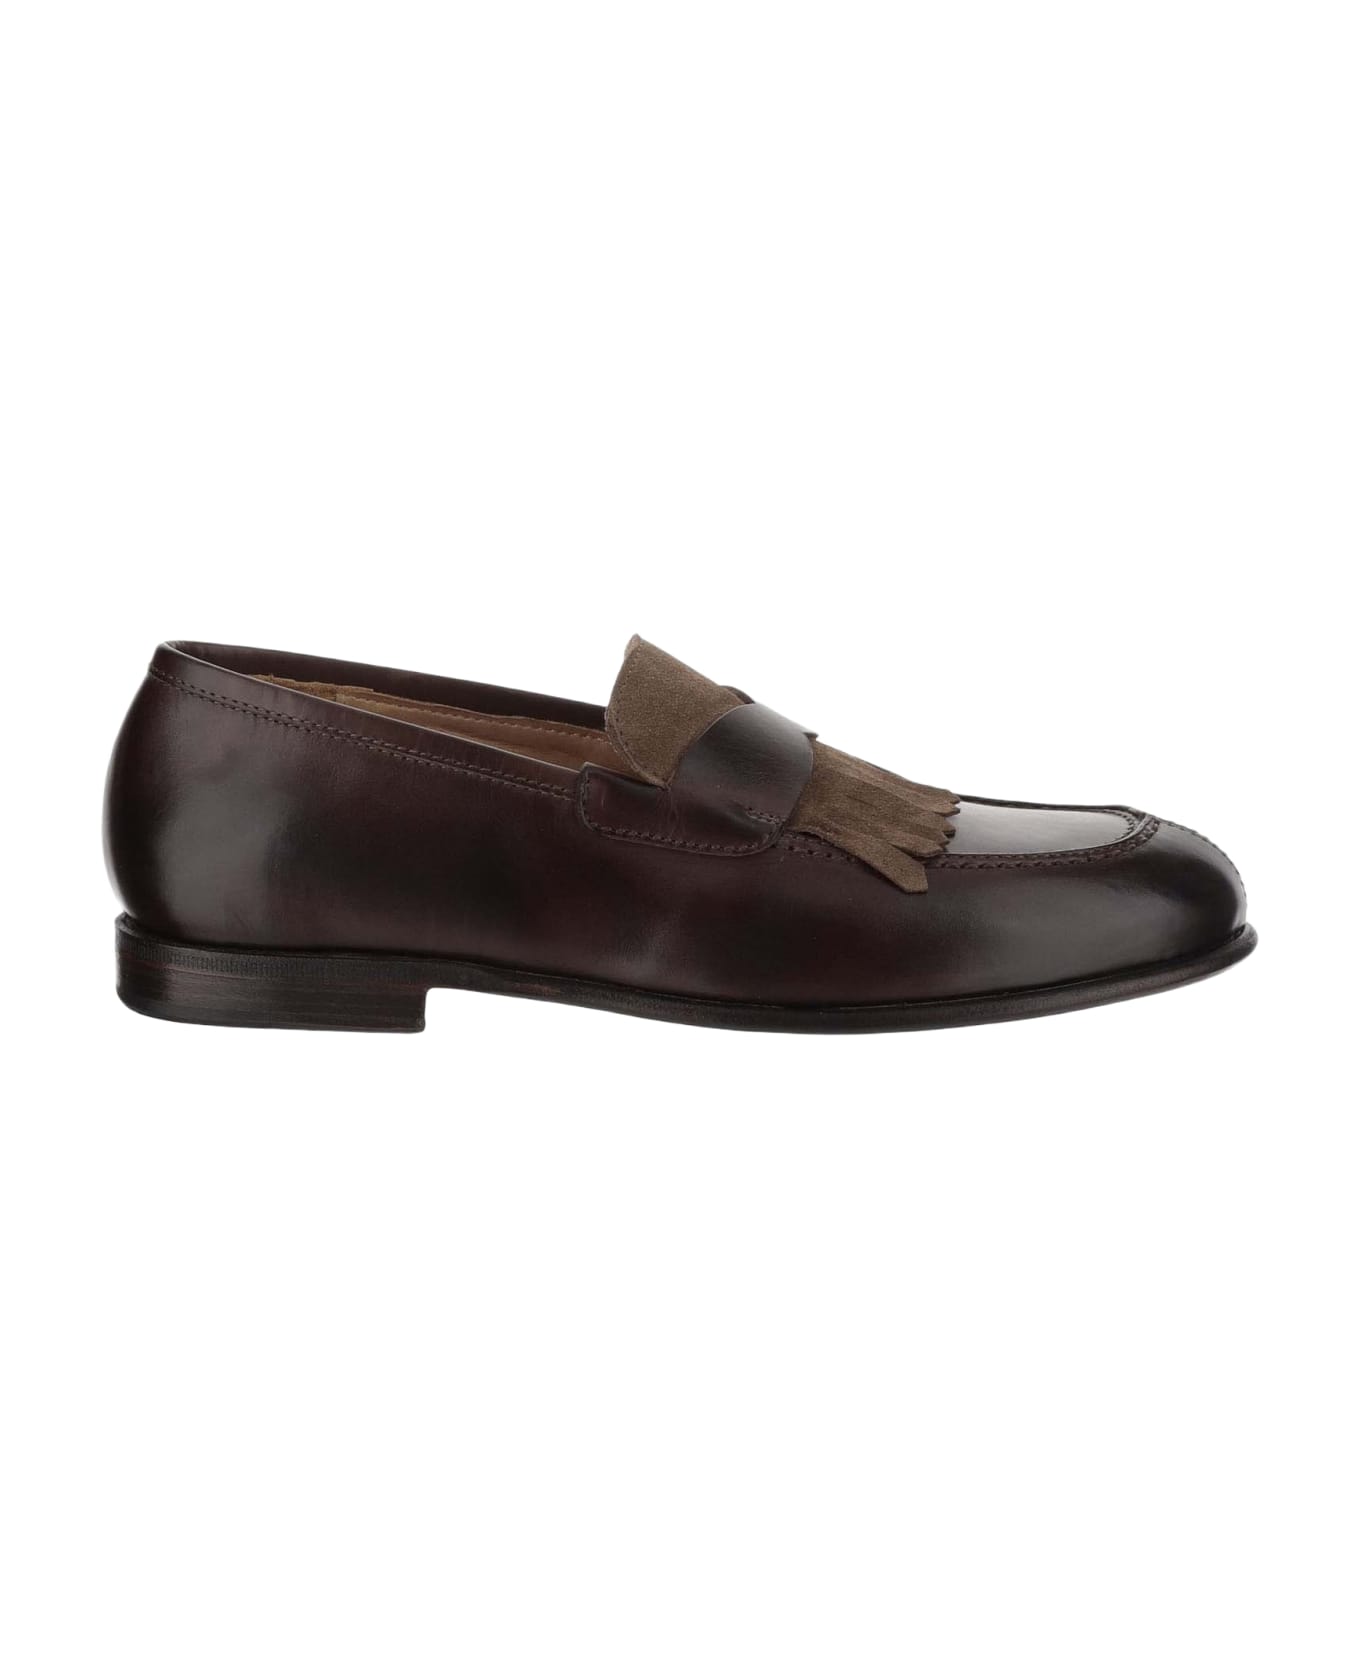 Hervè Chapelier Leather Loafers - Brown フラットシューズ